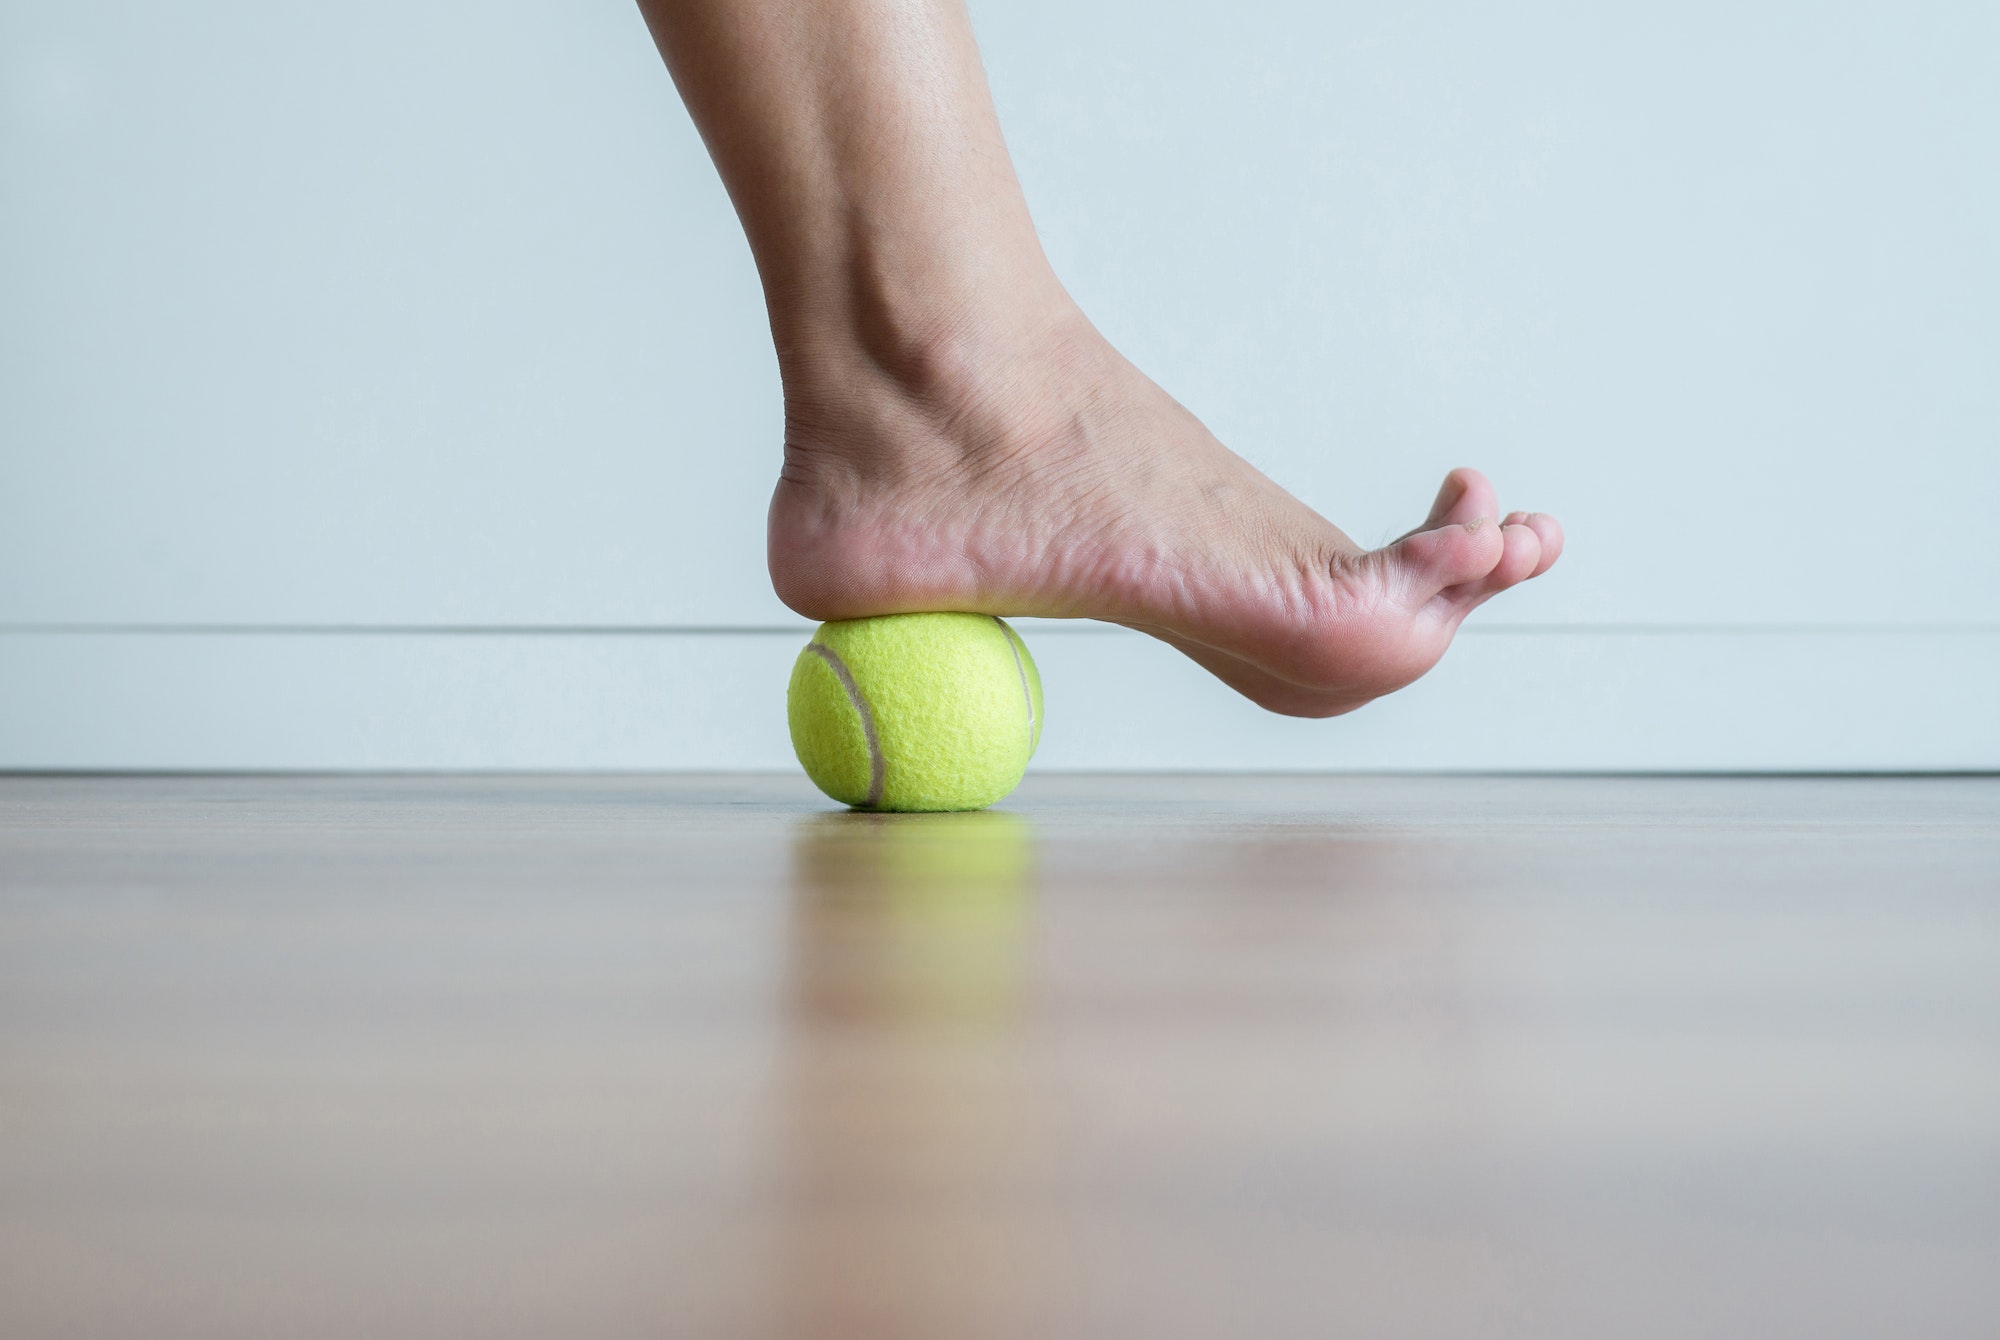 Woman massage with tennis ball to her foot in bedroom,Feet soles massage for plantar fasciitis